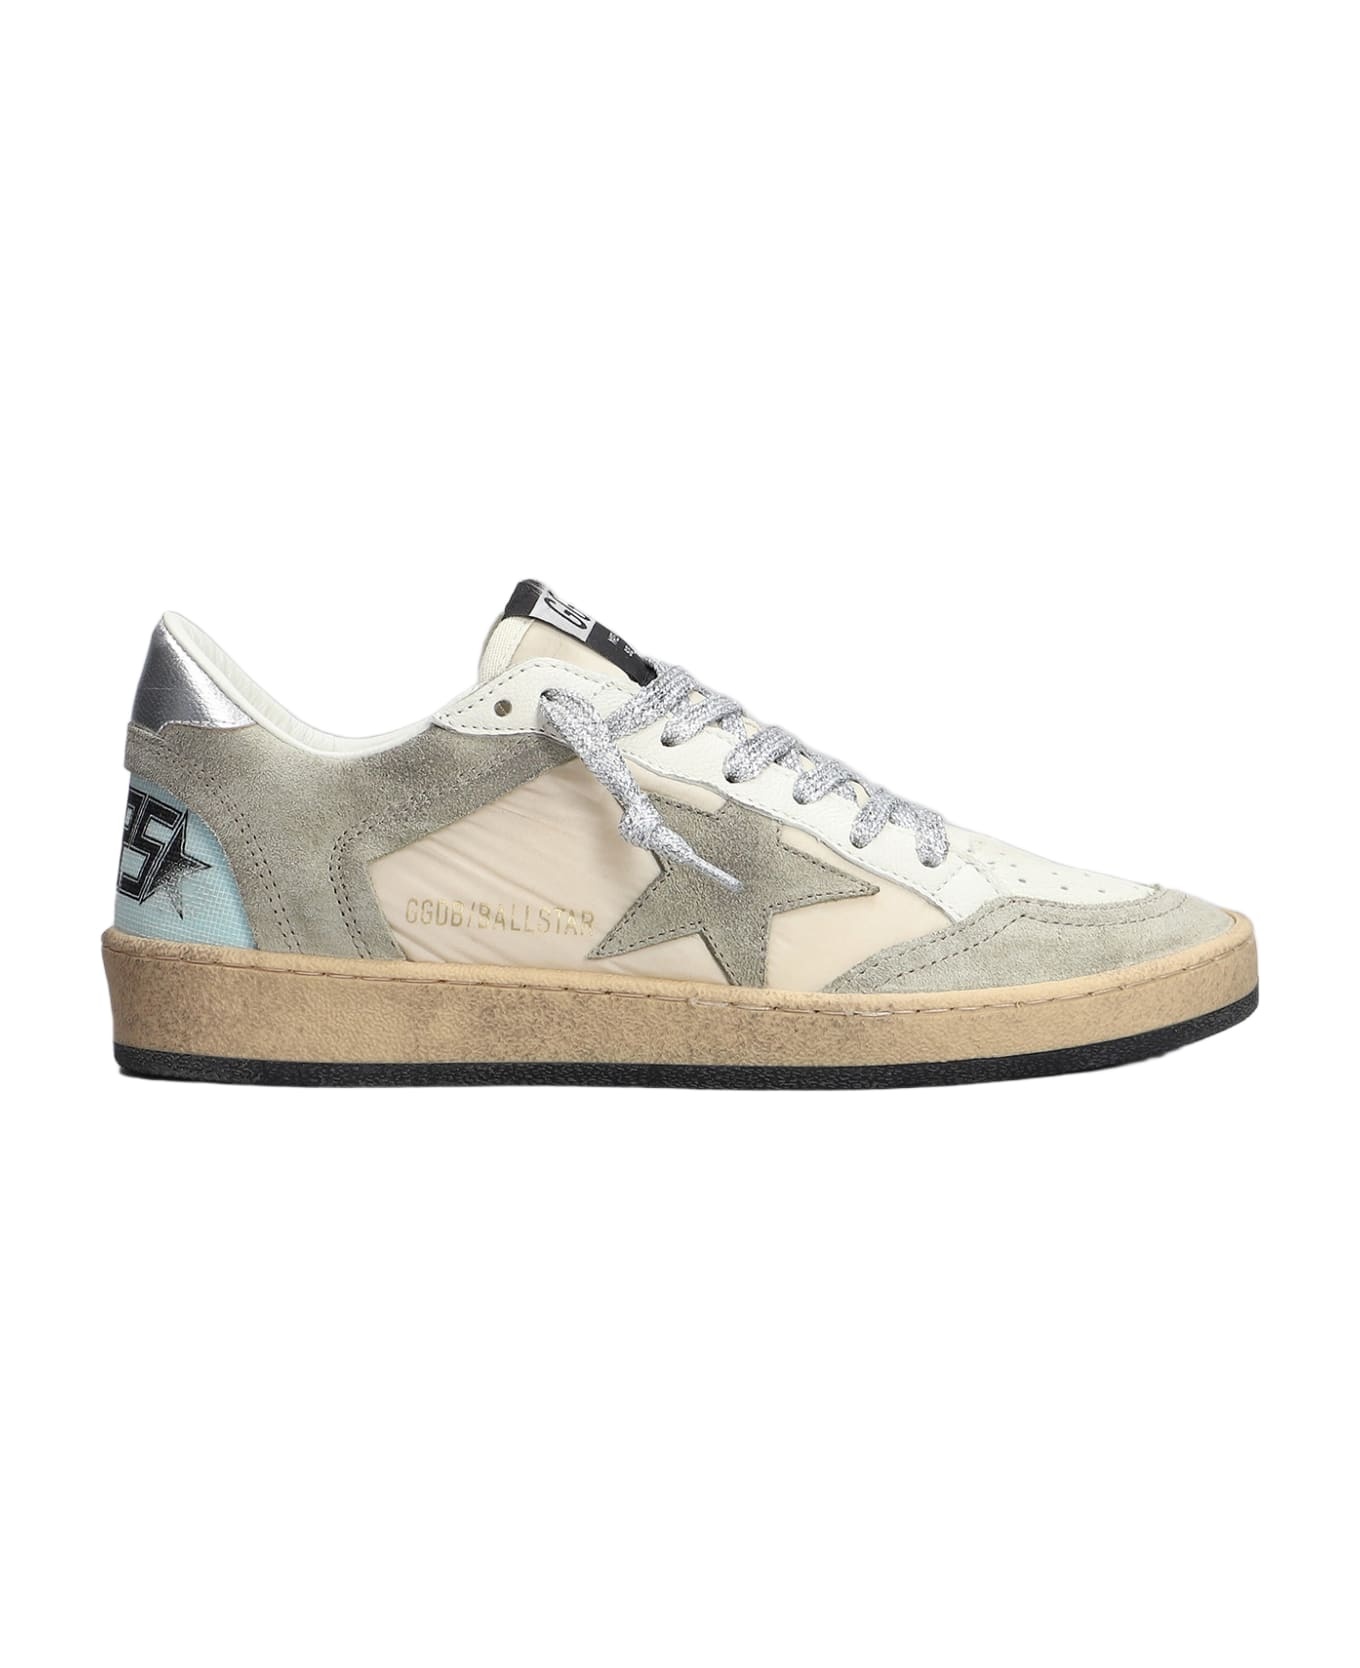 Ball Star Sneakers In Beige Leather And Fabric - 1